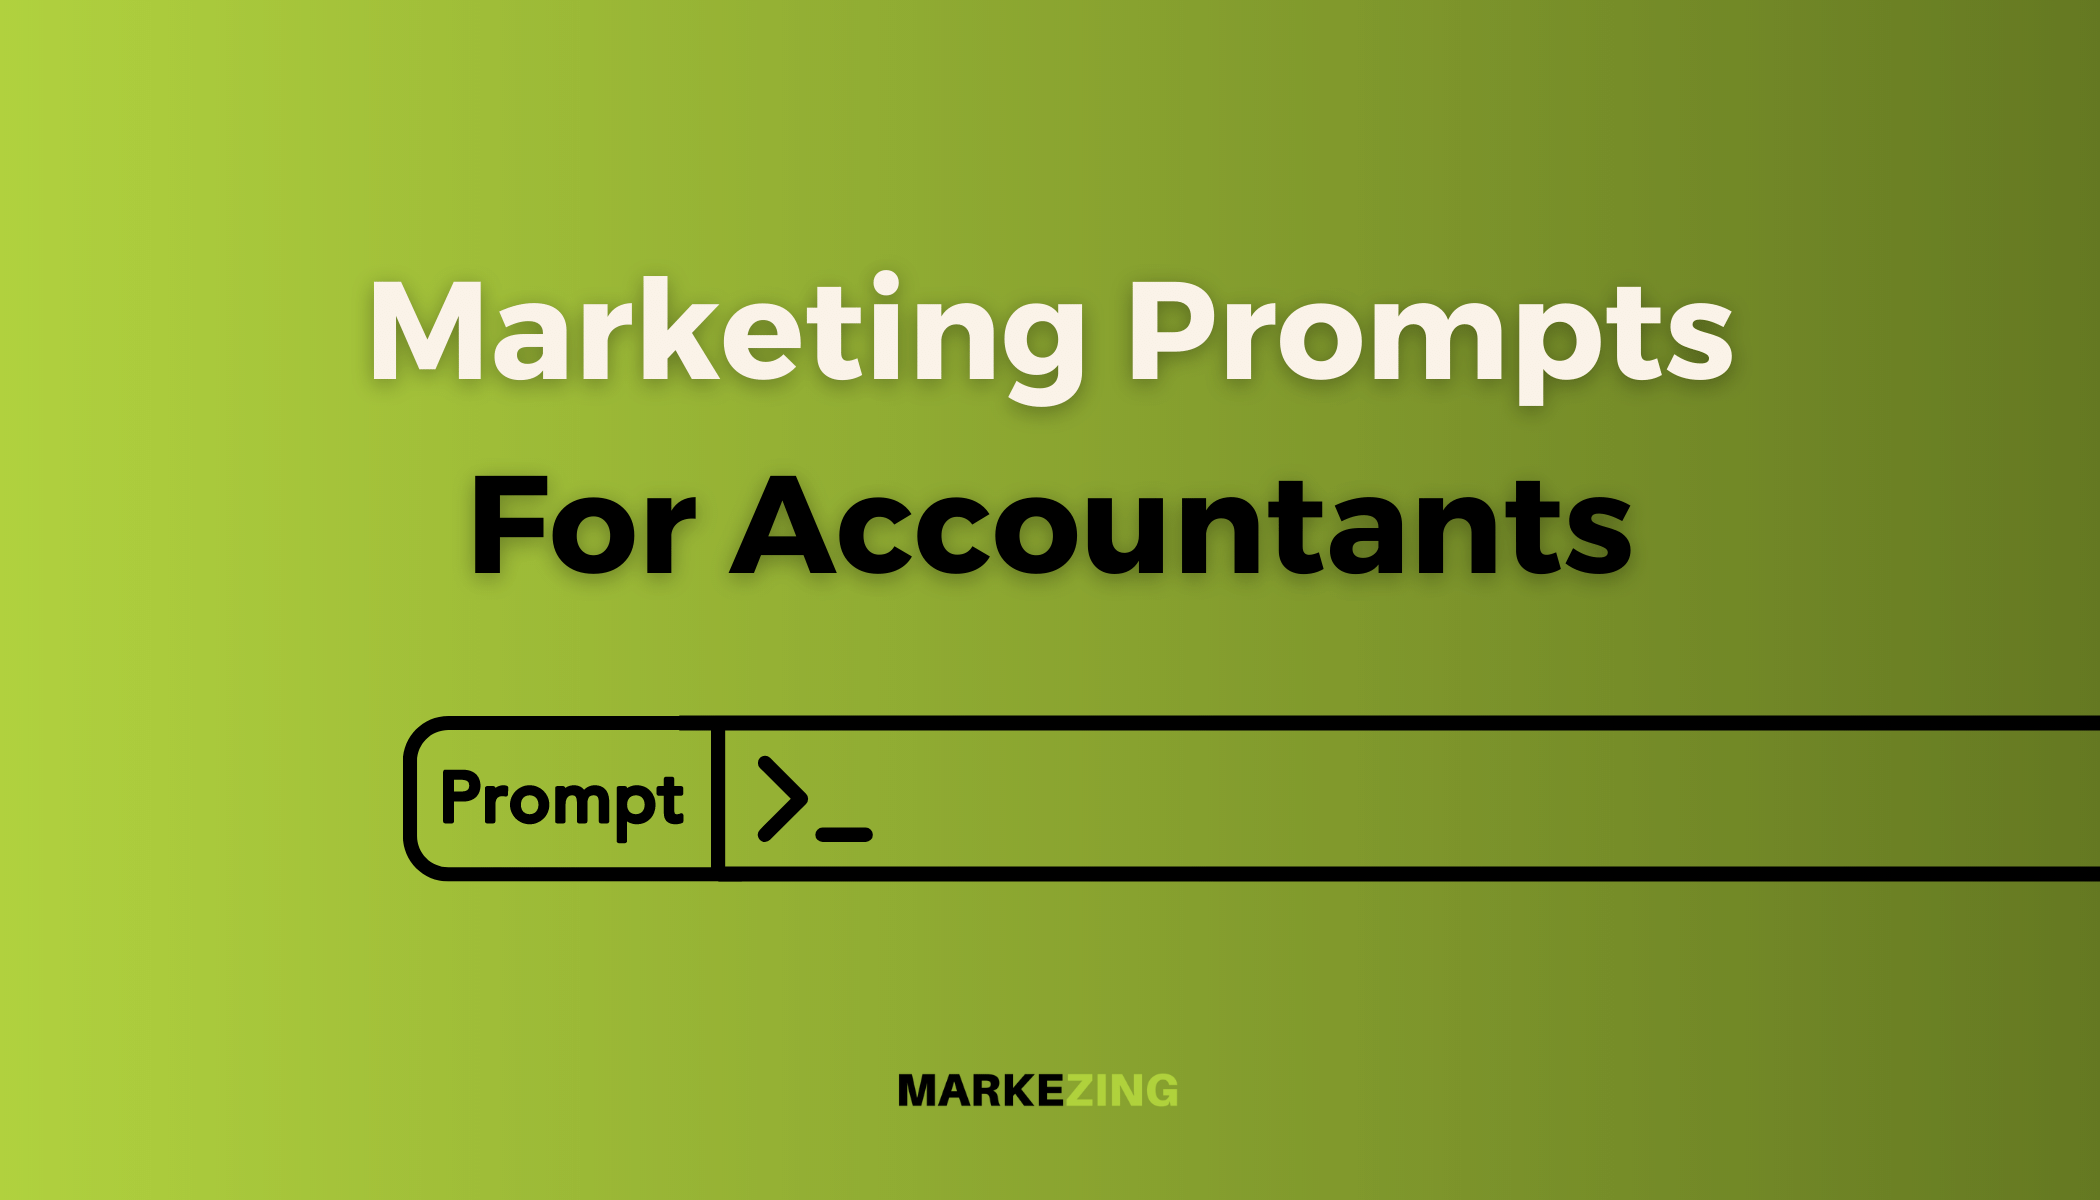 Marketing prompts for accountants